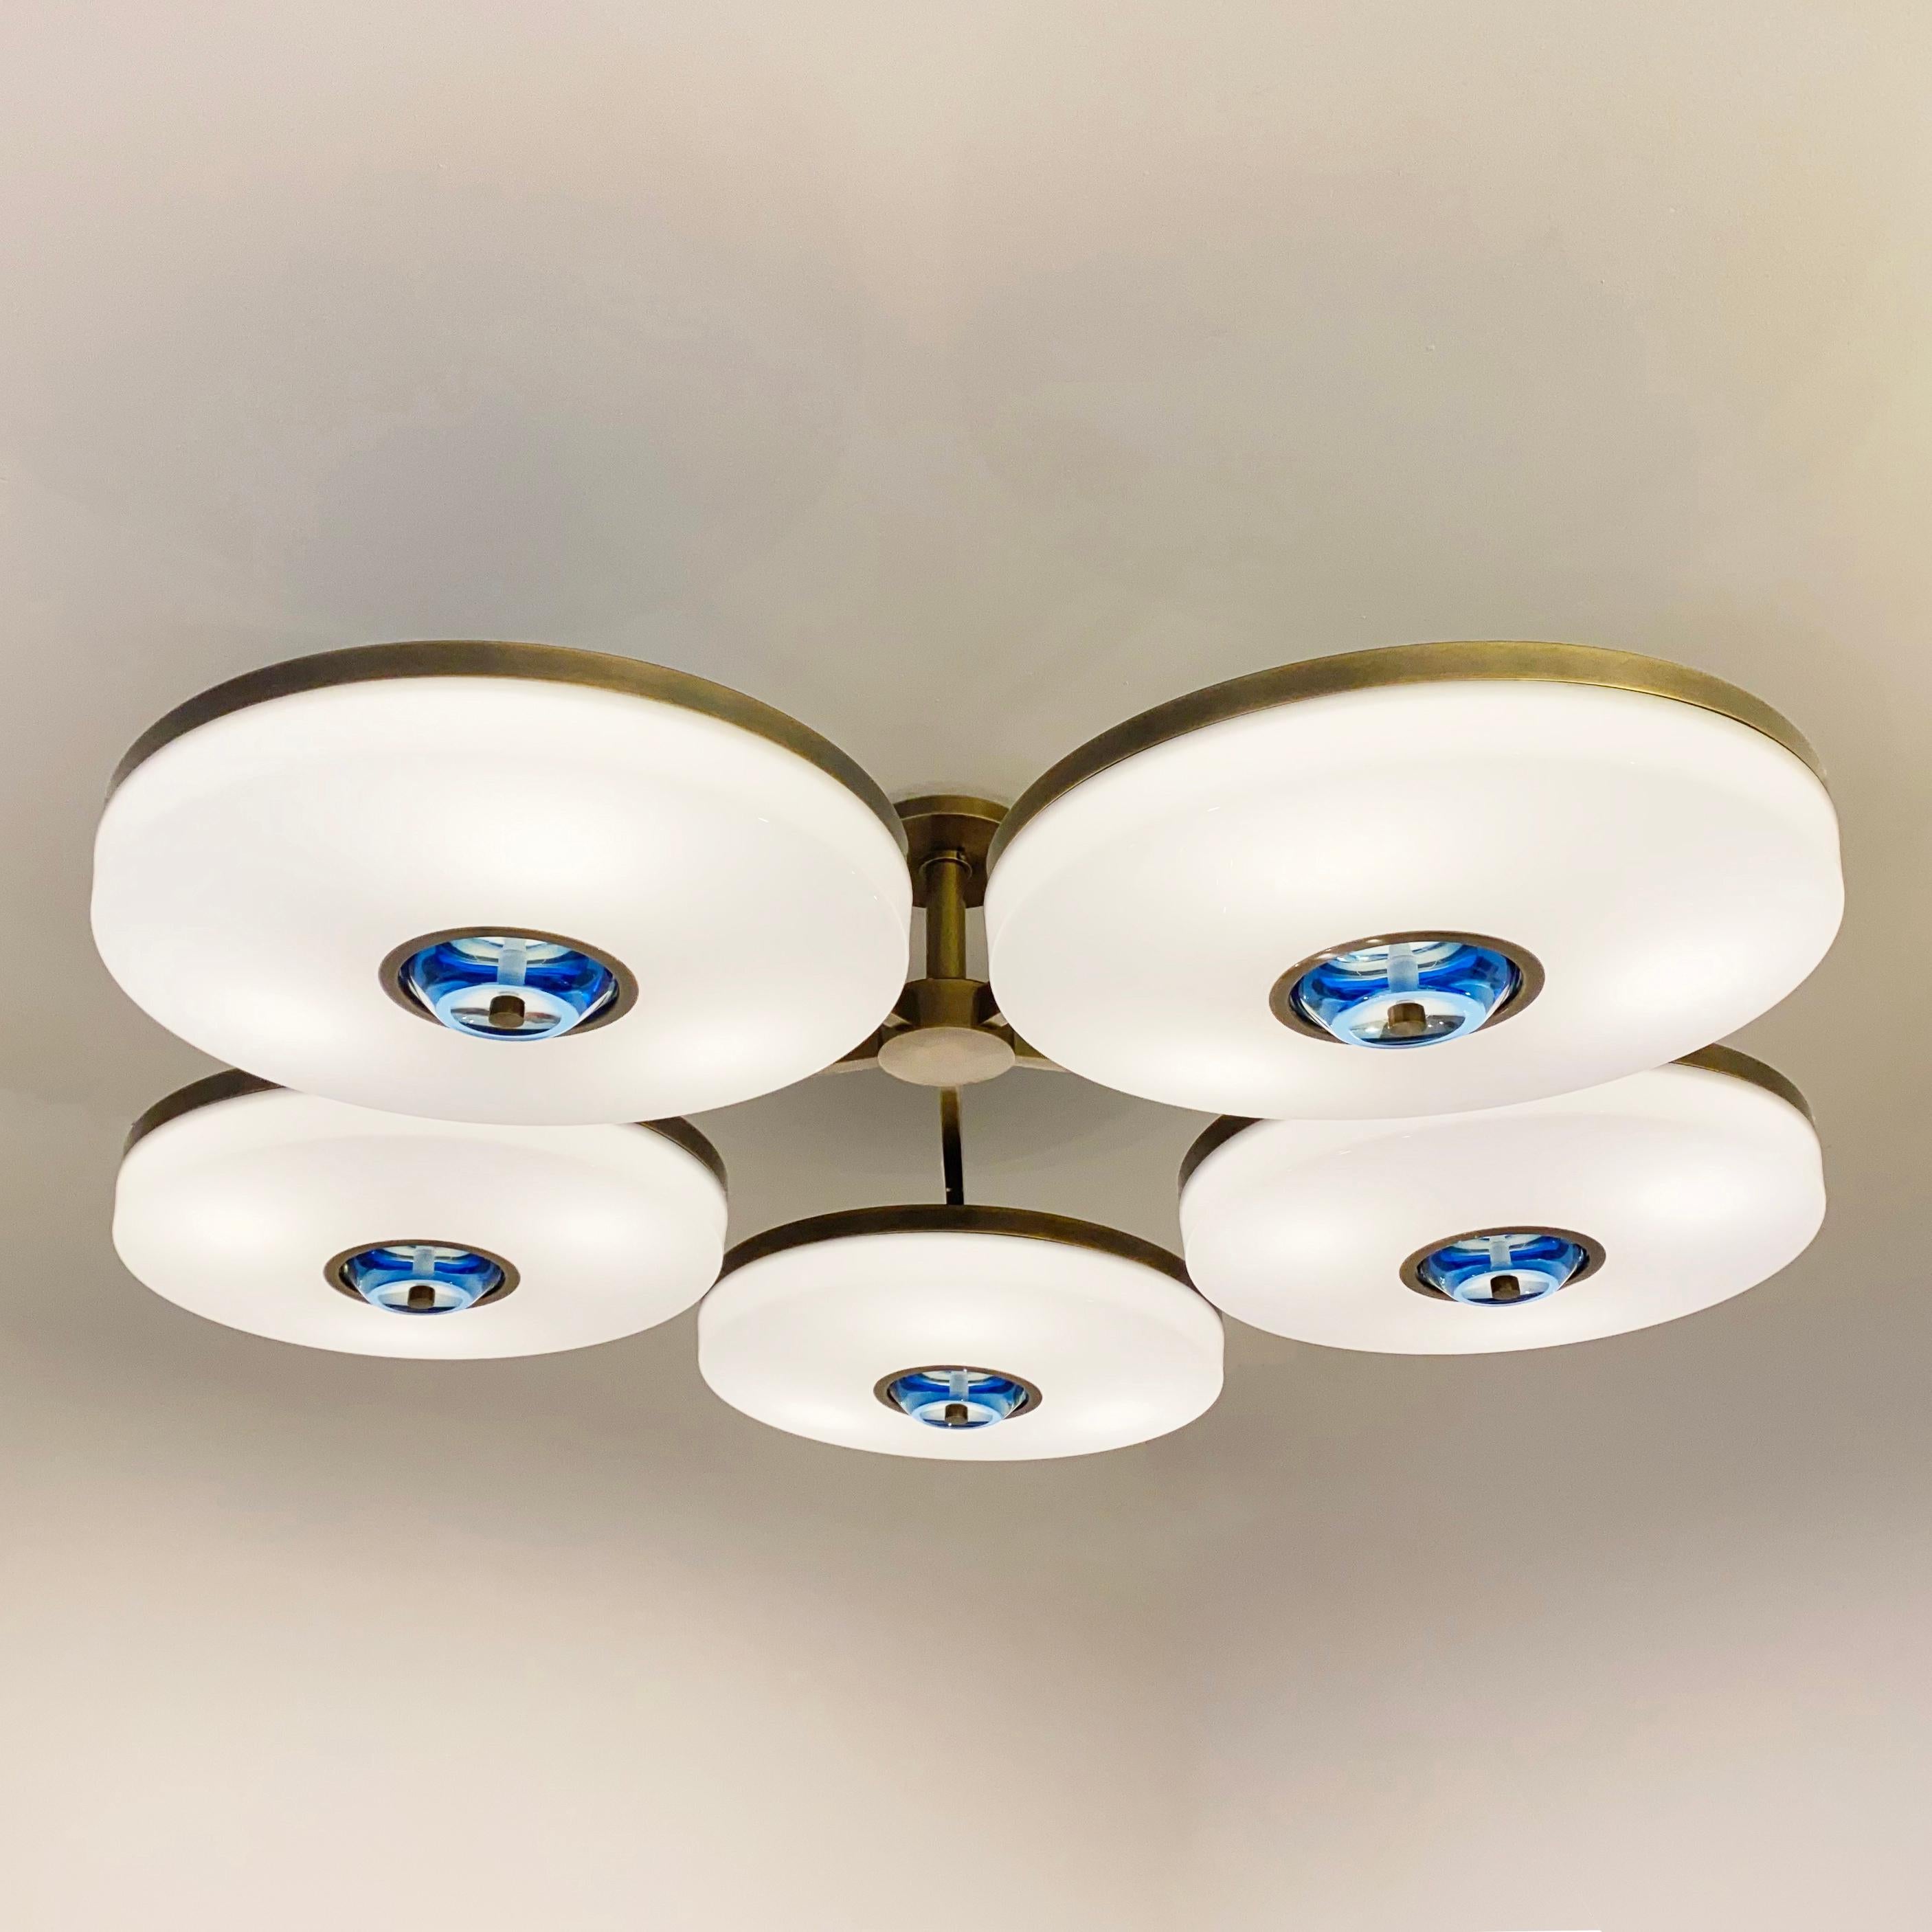 Iris N. 5 Ceiling Light by Gaspare Asaro - Polished Brass Finish In New Condition For Sale In New York, NY